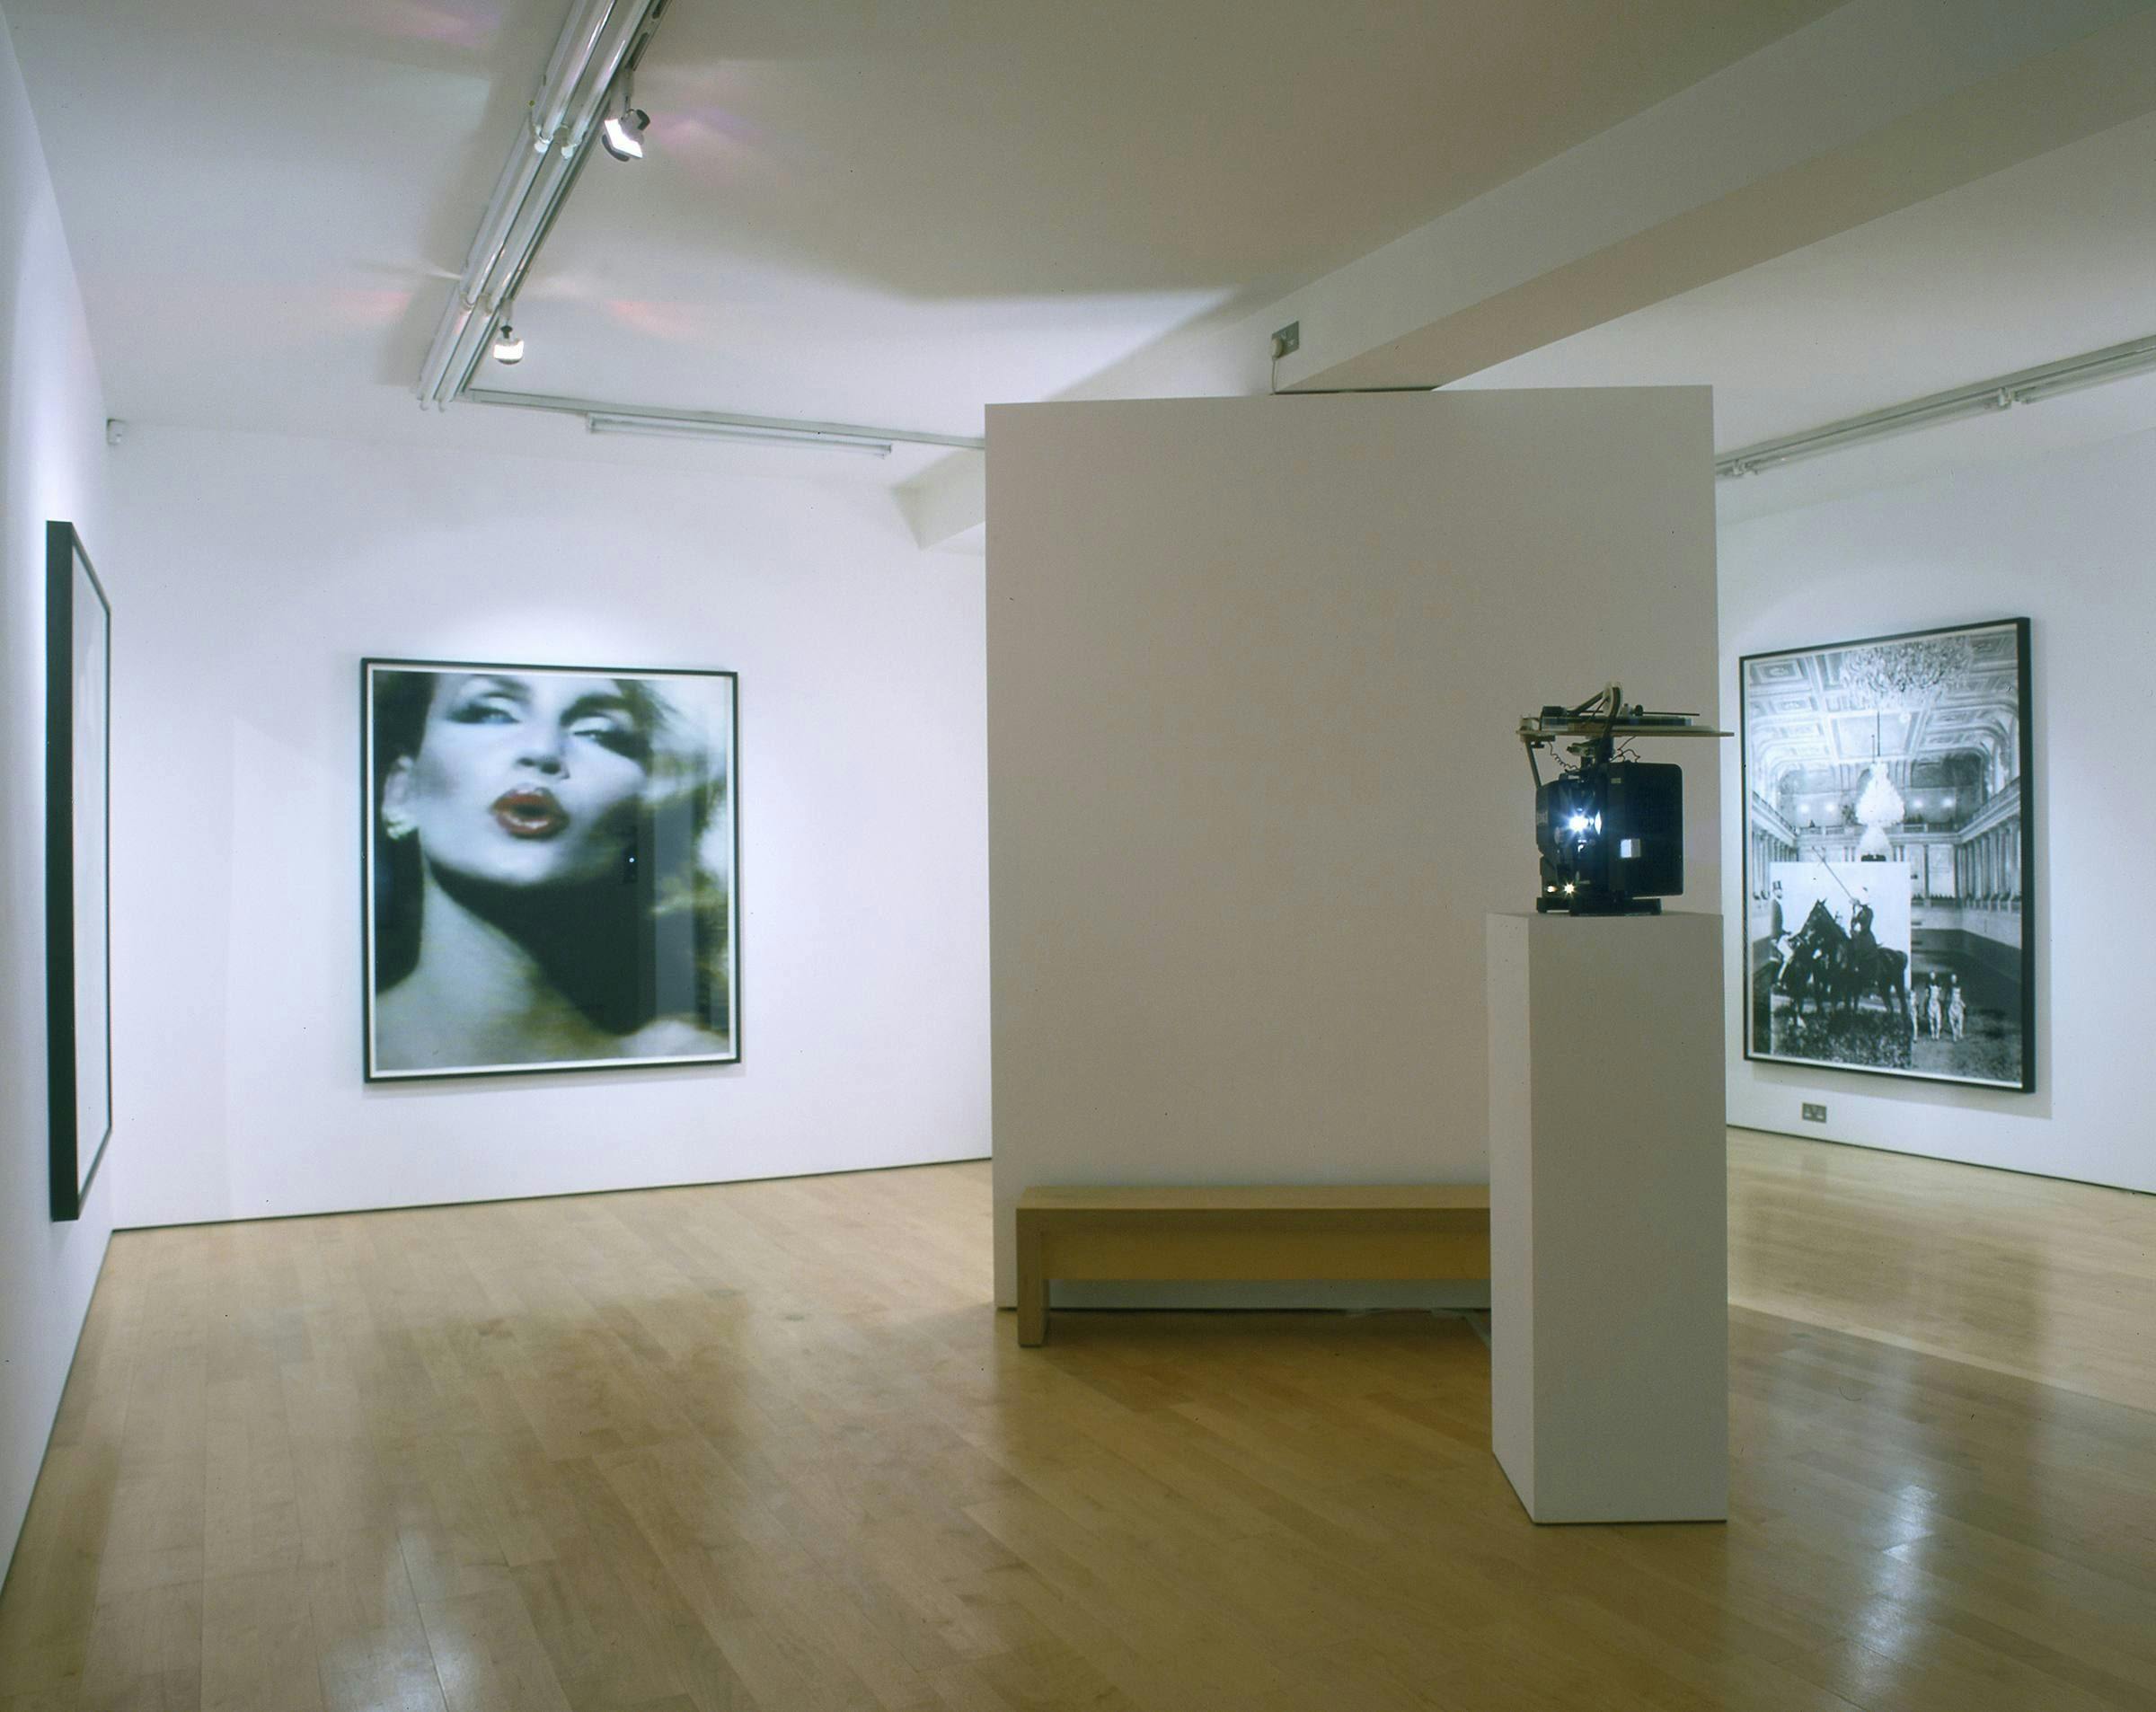 Image of a gallery where three large works hang on the wall and there is a bench and object on a plinth